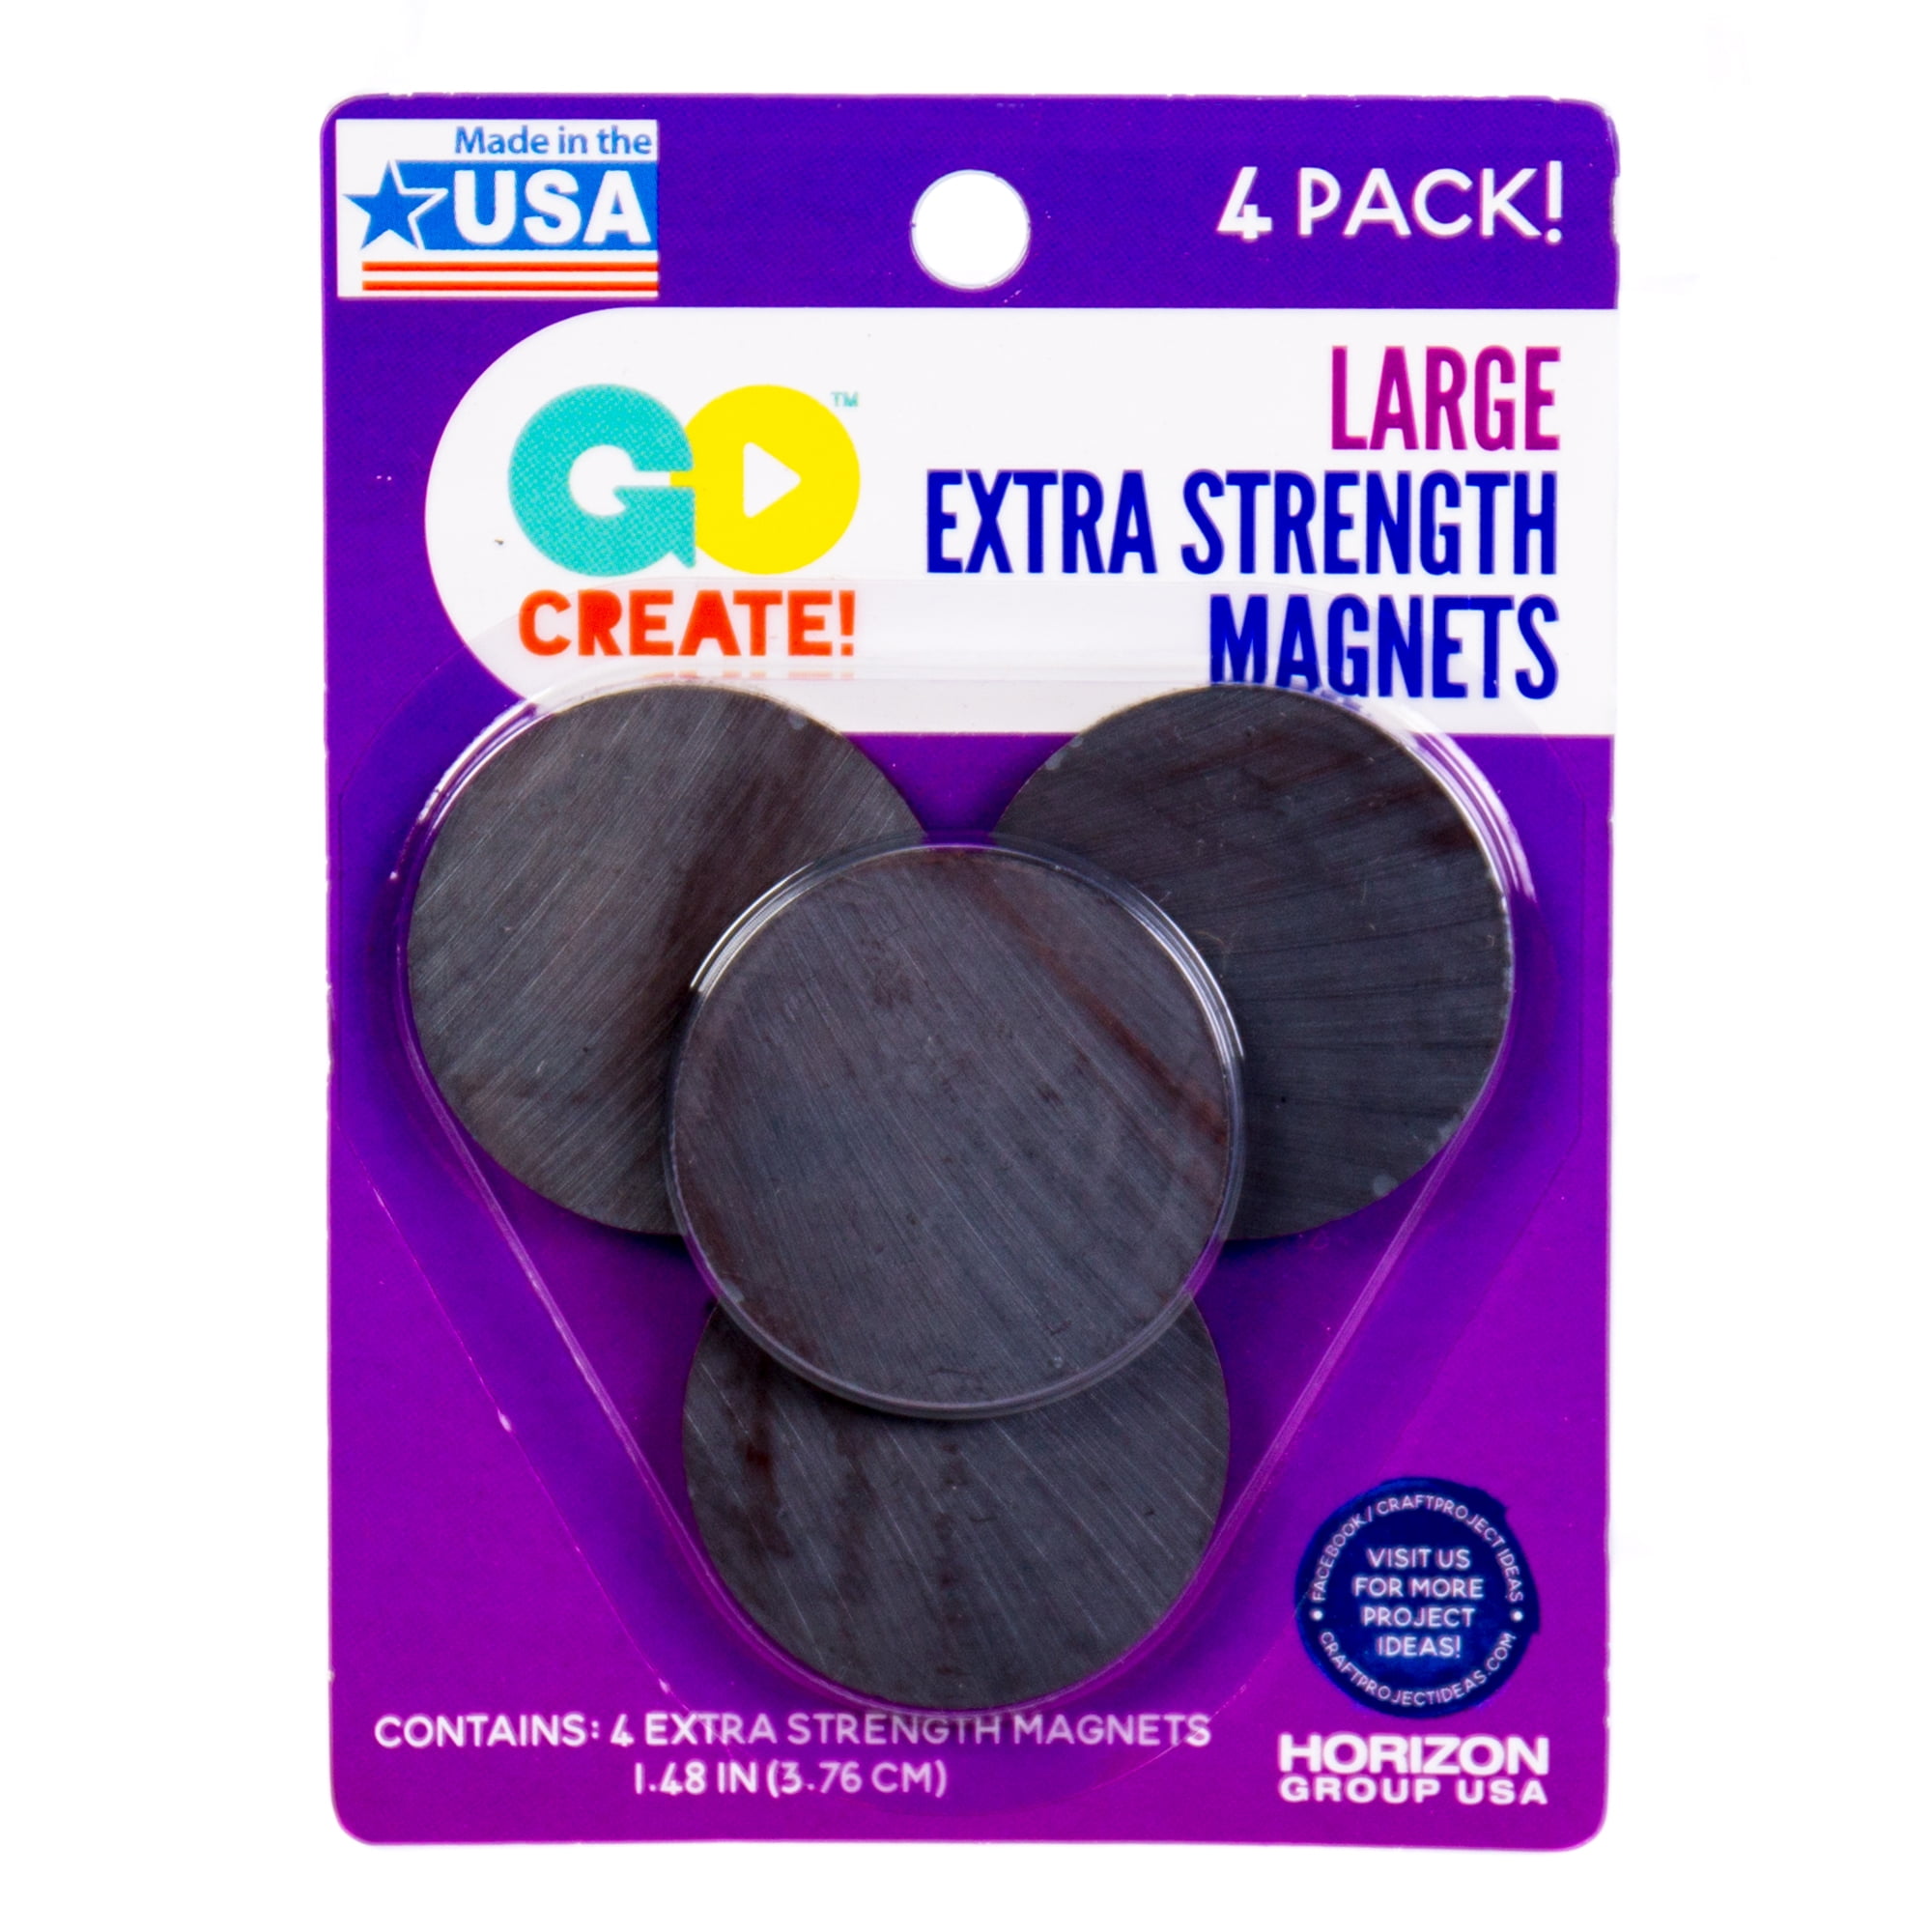 Go Create Large Extra Strength Magnets, 4 Magnets Total